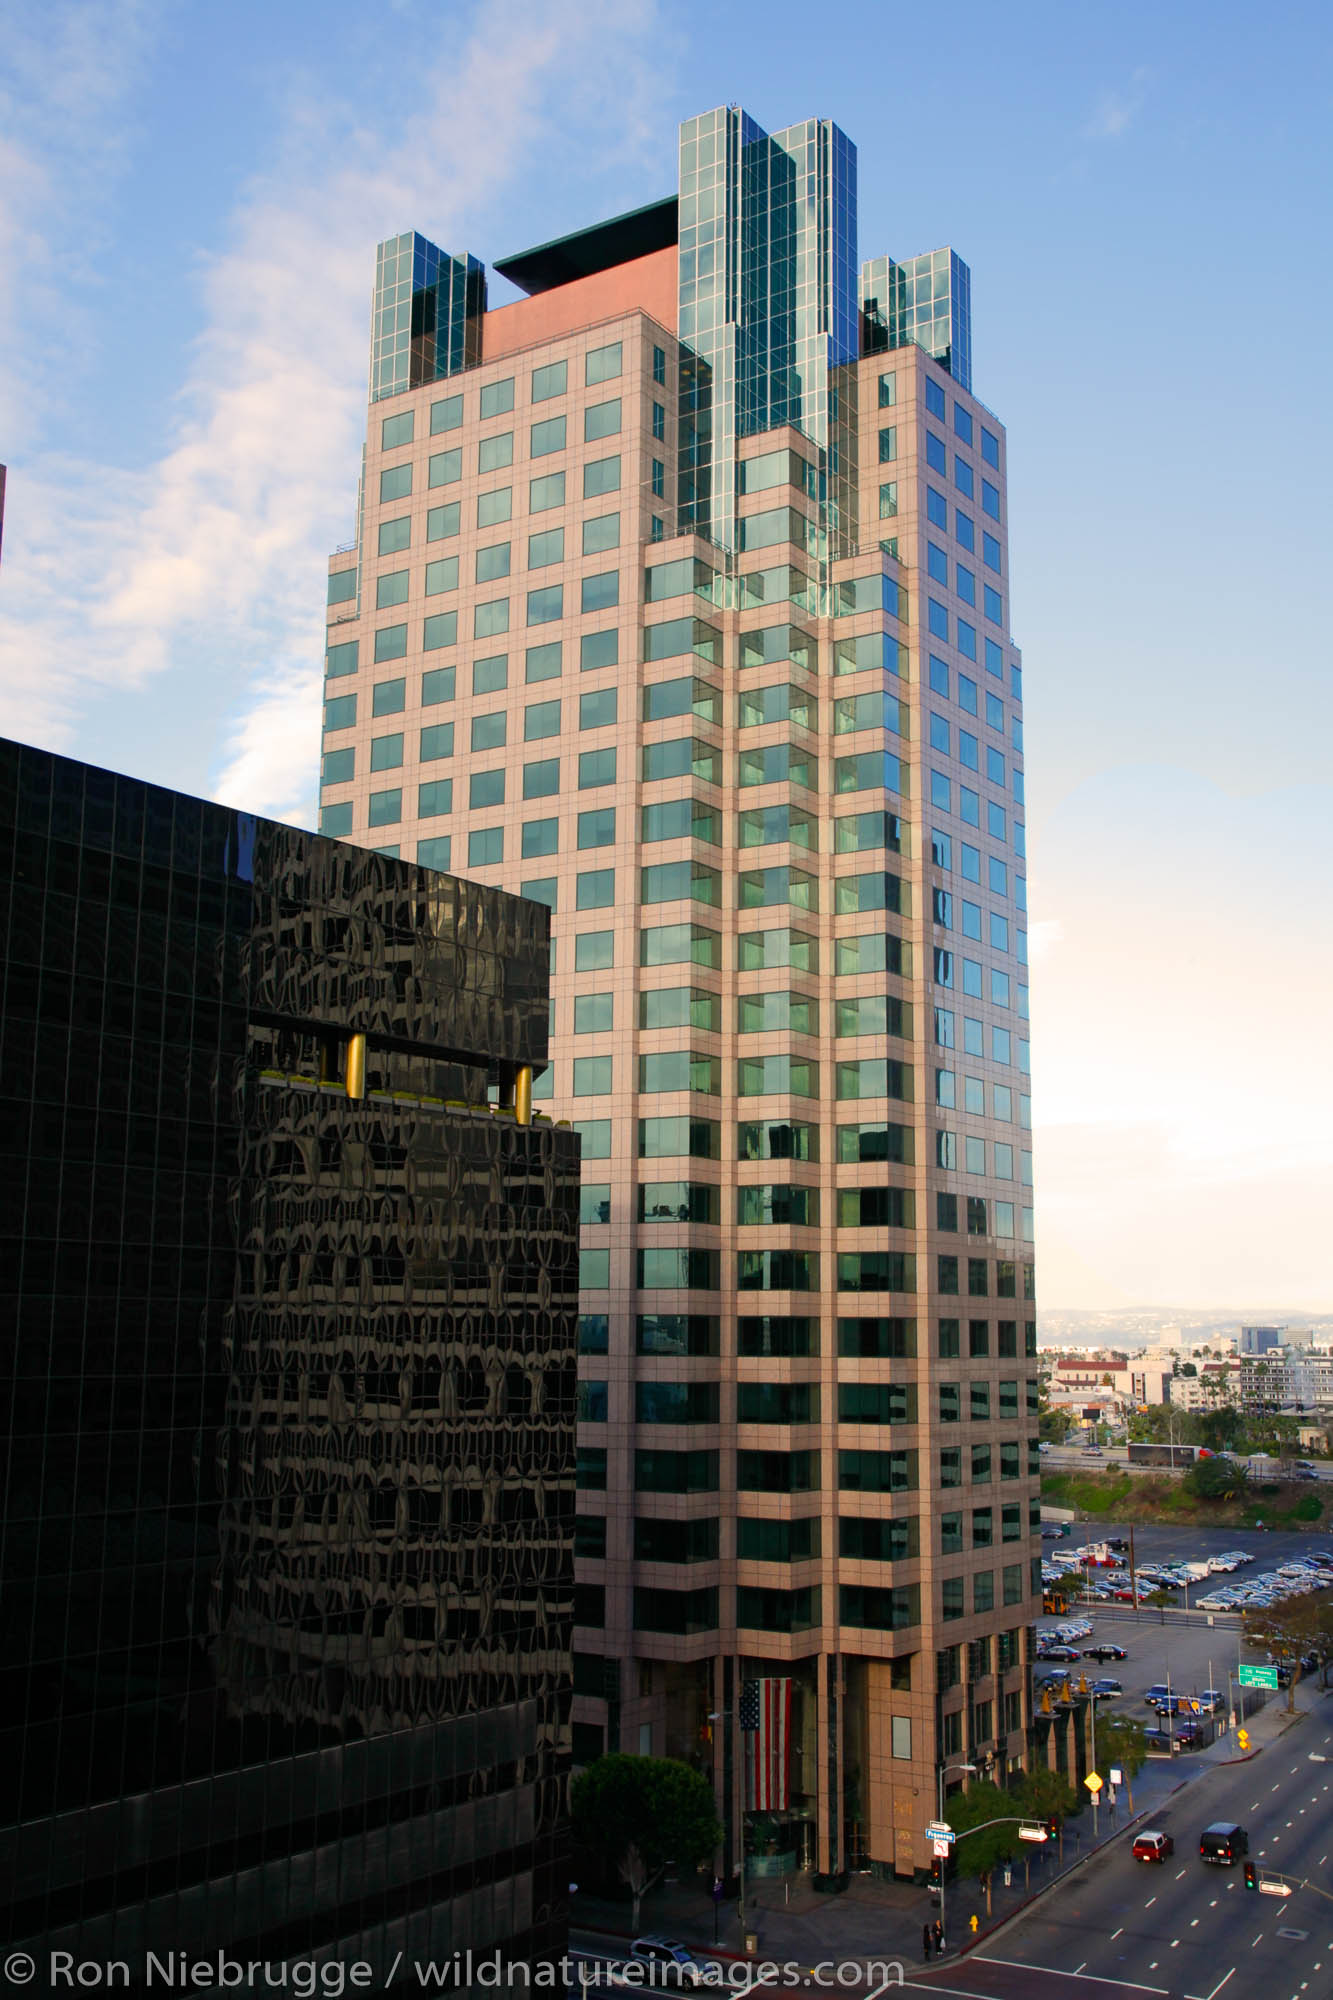 The 801 Tower was completed in 1992 and has 24 floors along with the 800 Tower to the left in Black, South Figueroa, downtown...